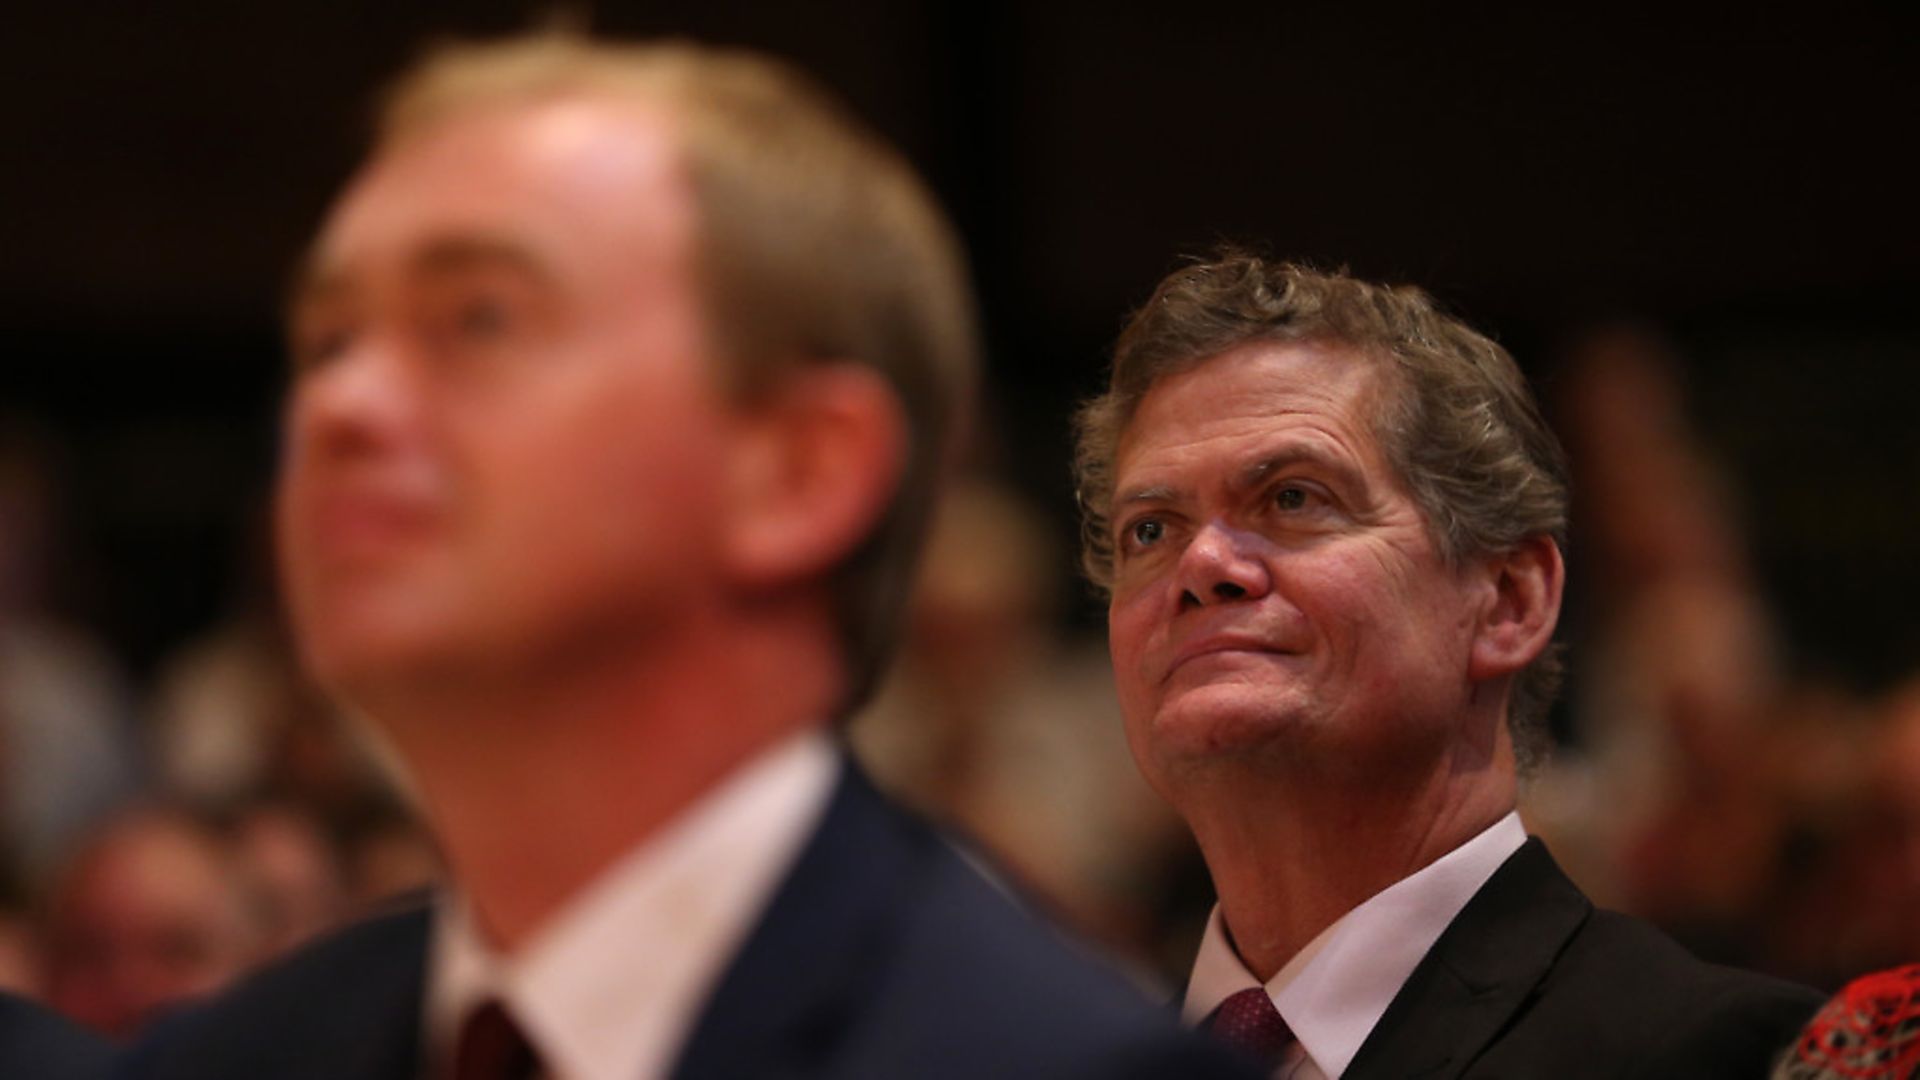 Stephen Lloyd MP (right) sits behind Tim Farron MP at Lib Dem conference. Photograph: Andrew Matthews/PA. - Credit: PA Archive/PA Images